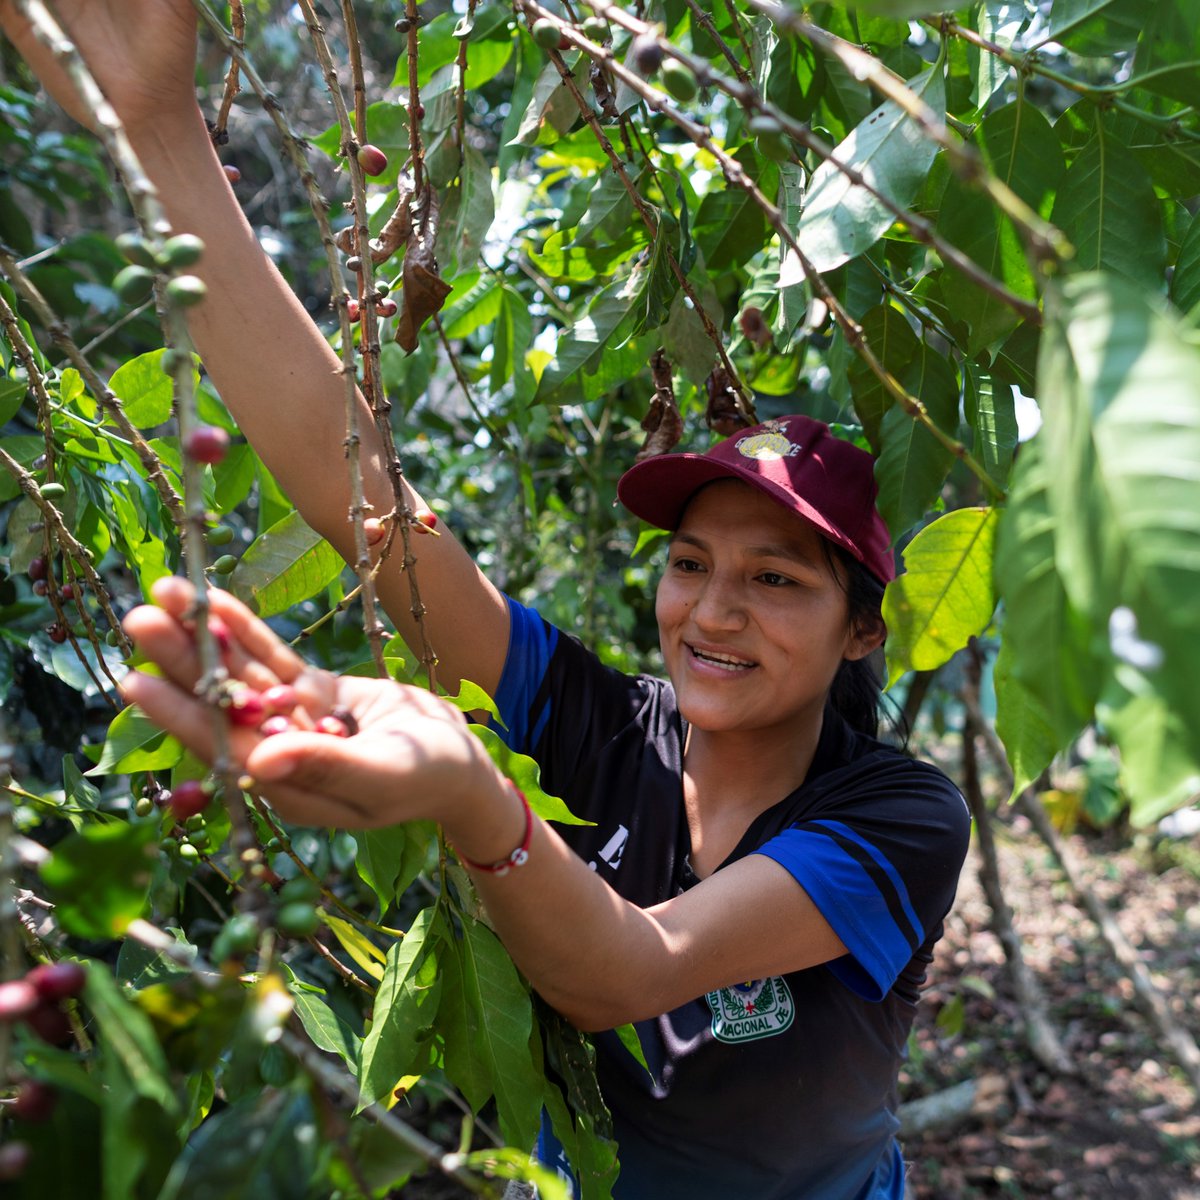 Nancy is a proud member of the indigenous Awajún community of #Peru 🇵🇪 Her mother grows coffee as part of an IFAD-supported organization, and Nancy is excited to continue her legacy. But she also loves caring for the forest through her culture's ancestral knowledge🍃